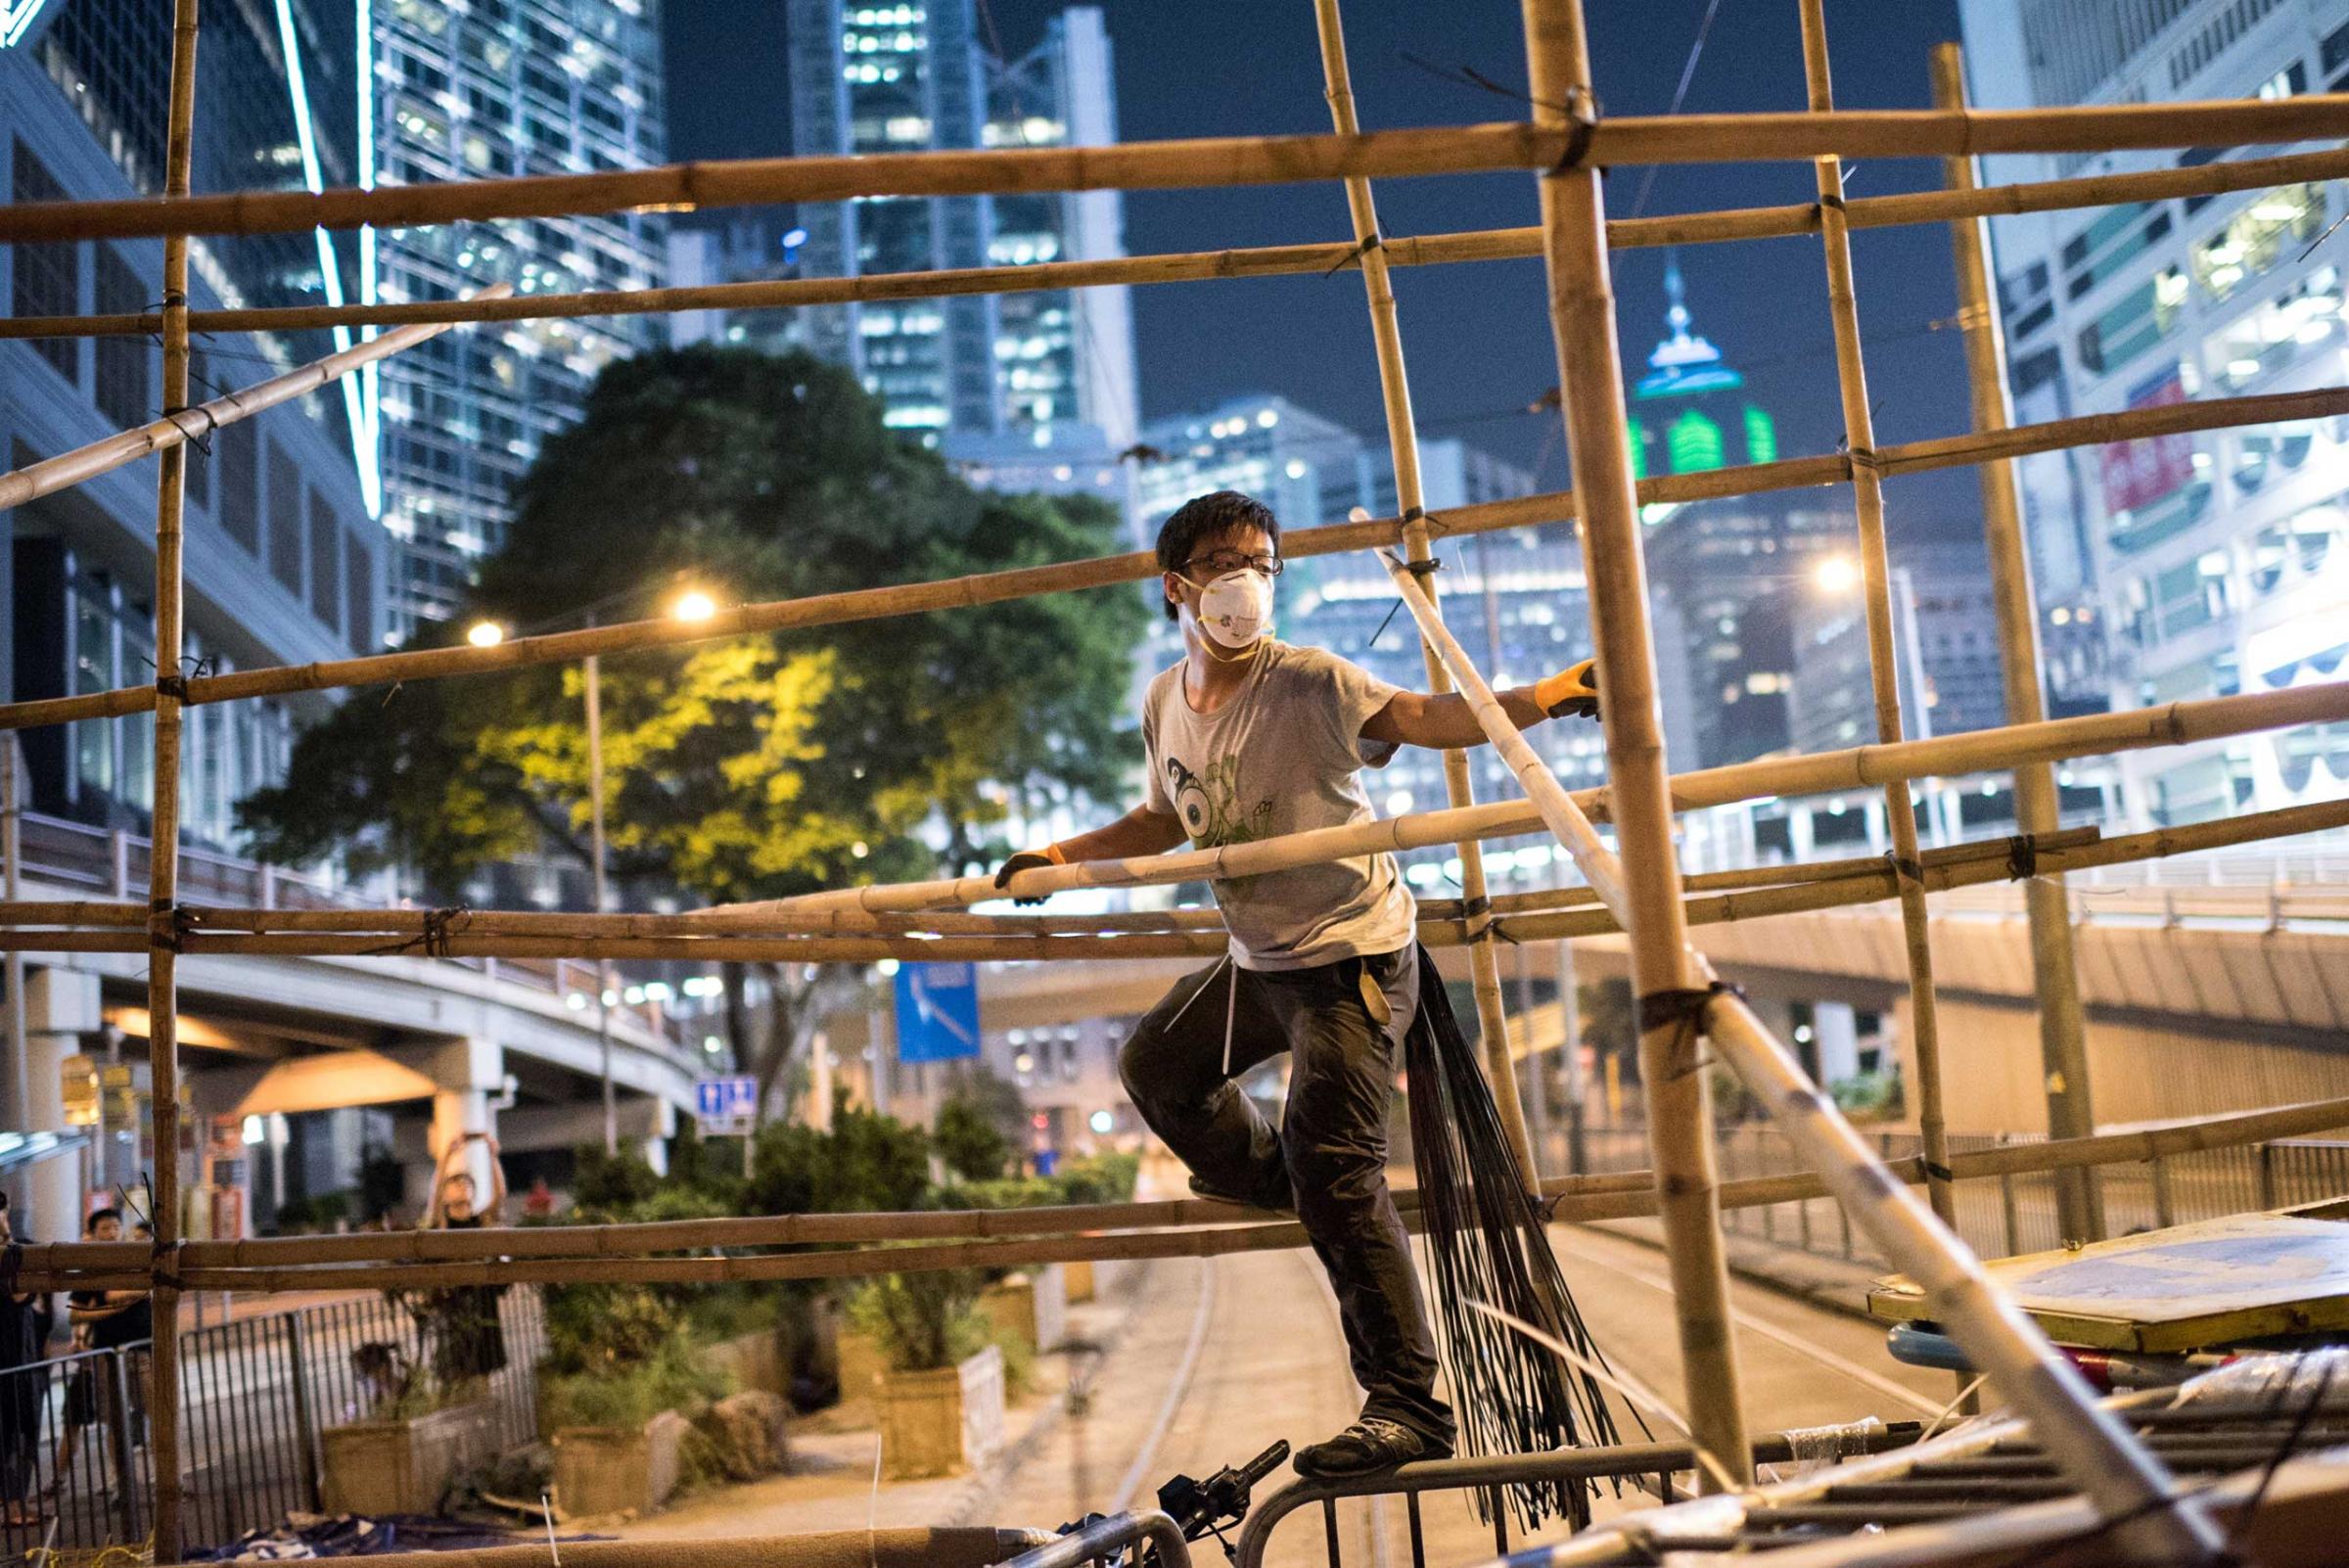 A pro-democracy protester uses bamboo to strengthen a barricade blocking a major road in Hong Kong on Oct. 13, 2014.